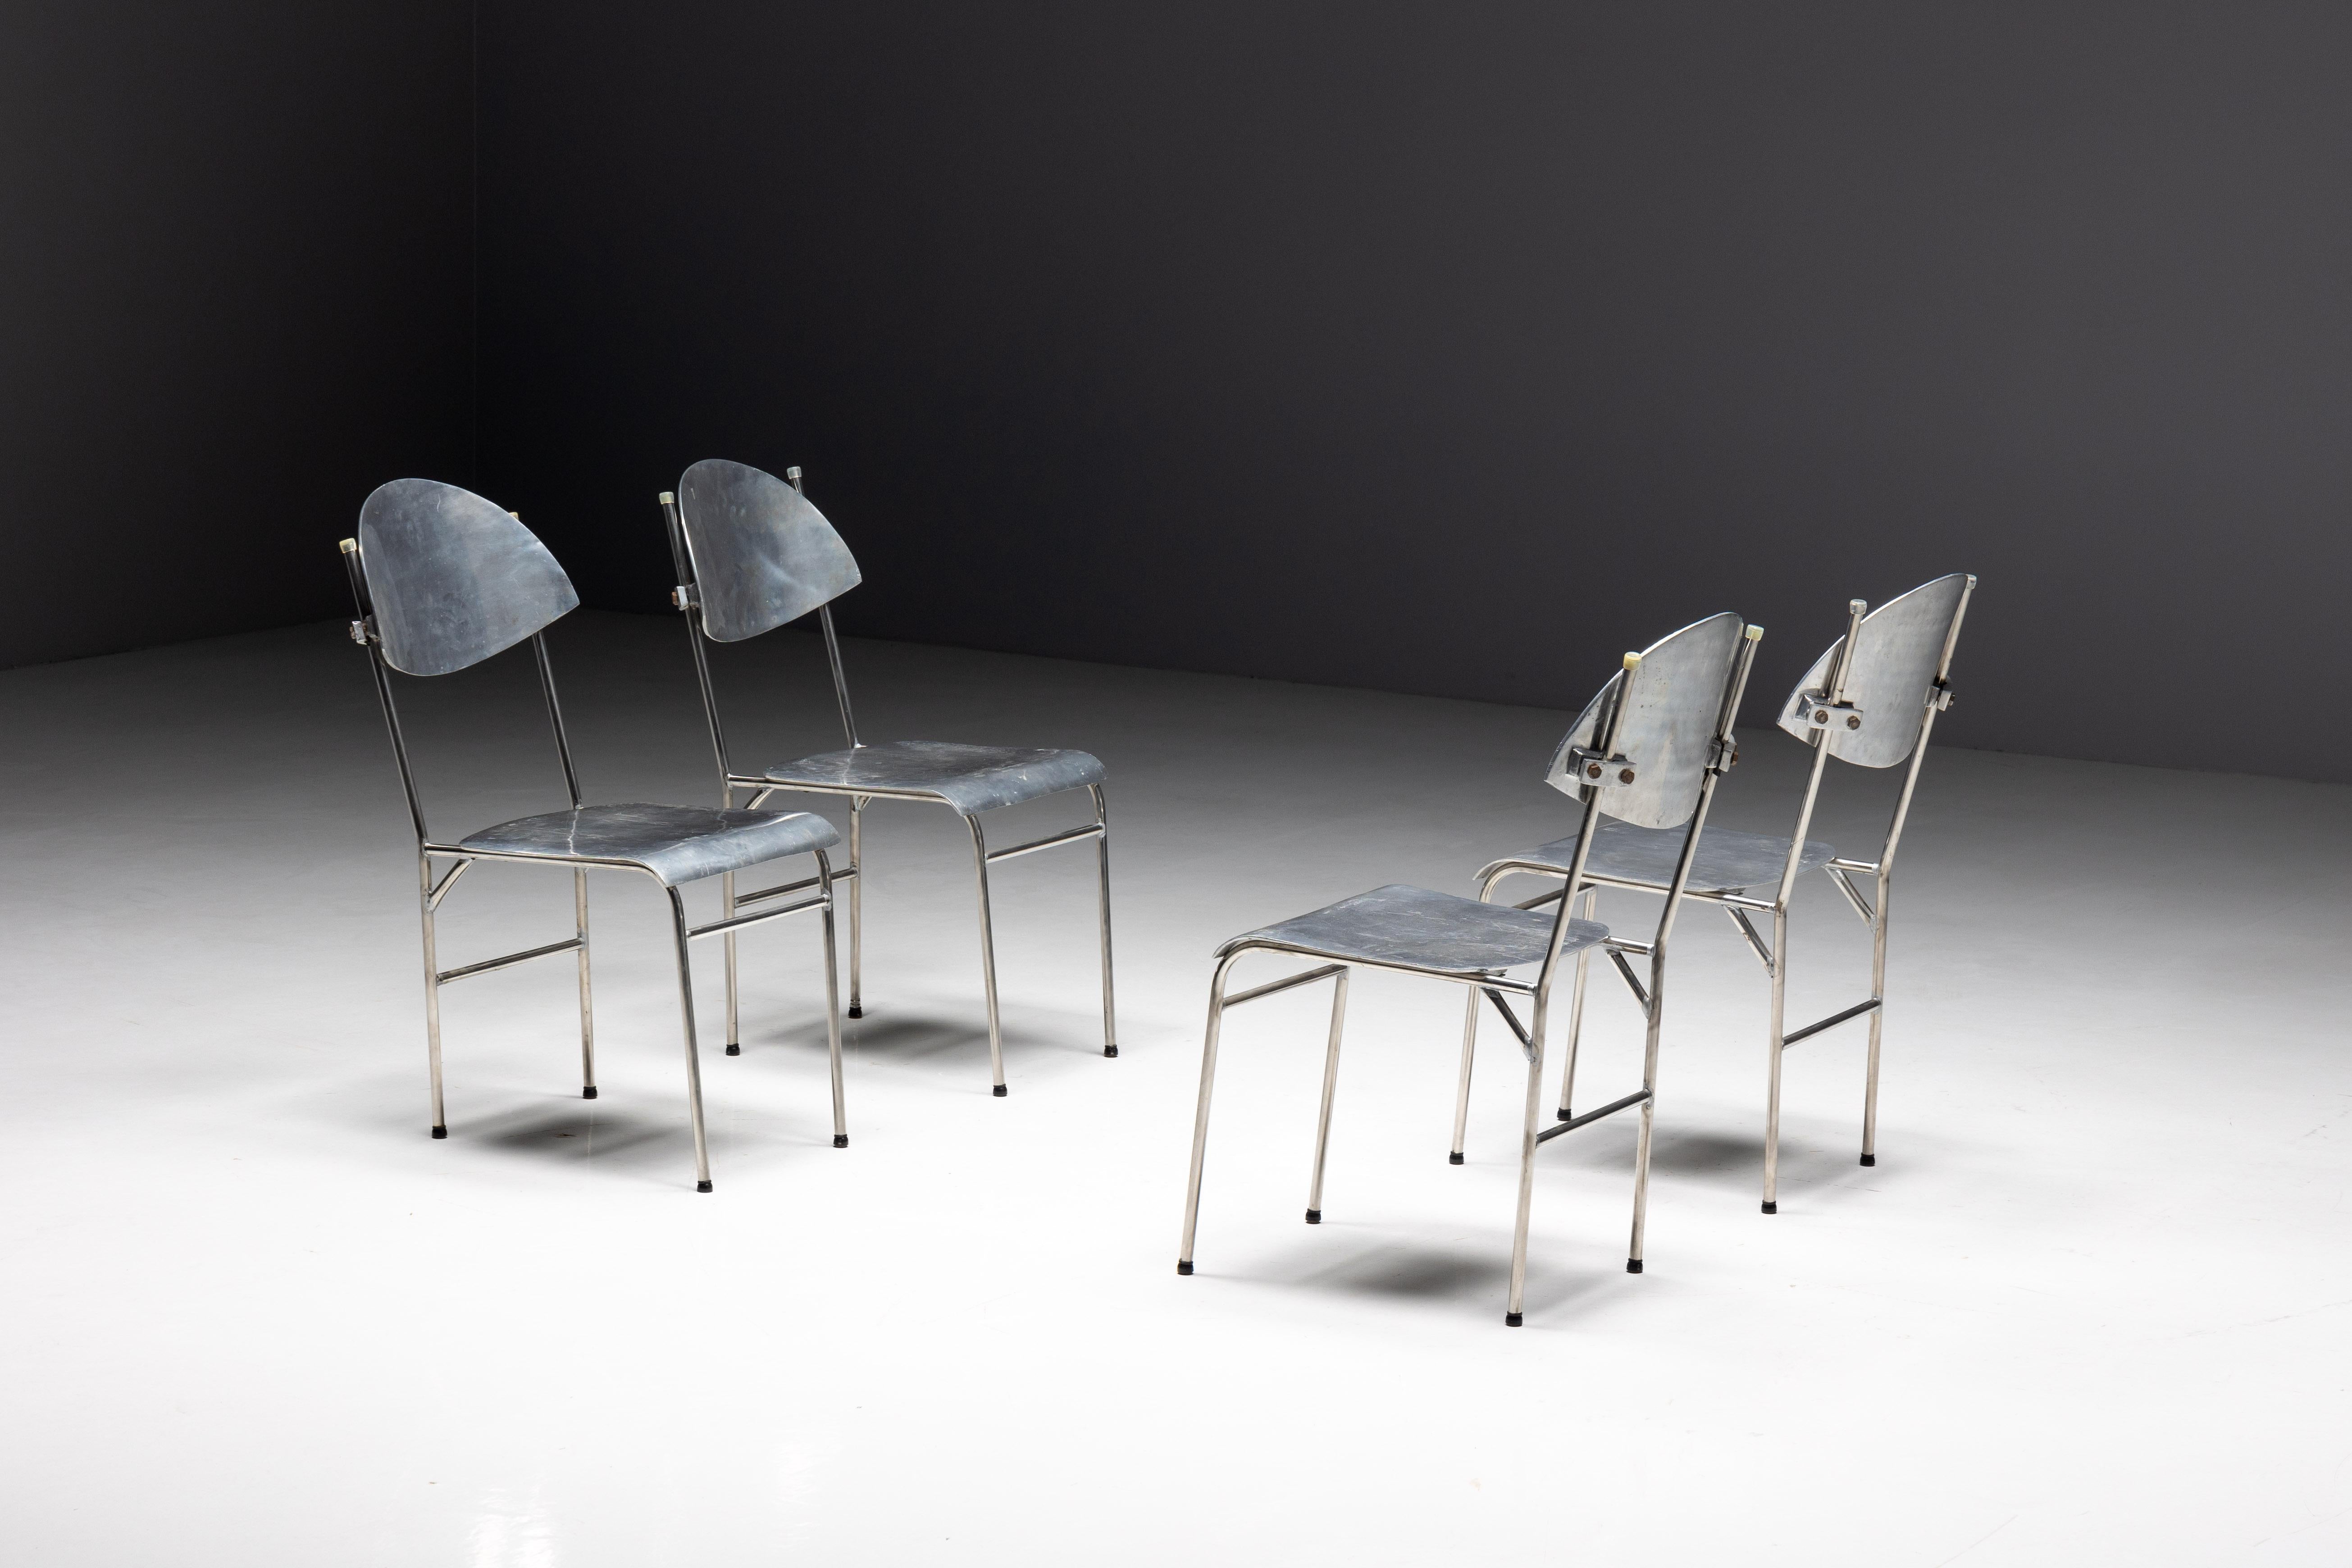 Aluminum postmodern dining chairs made in the 1980s from lightweight but durable aluminum. These chairs have clean lines and geometric shapes that reflect the simplicity of modern design. However, it is the playful details that really set them